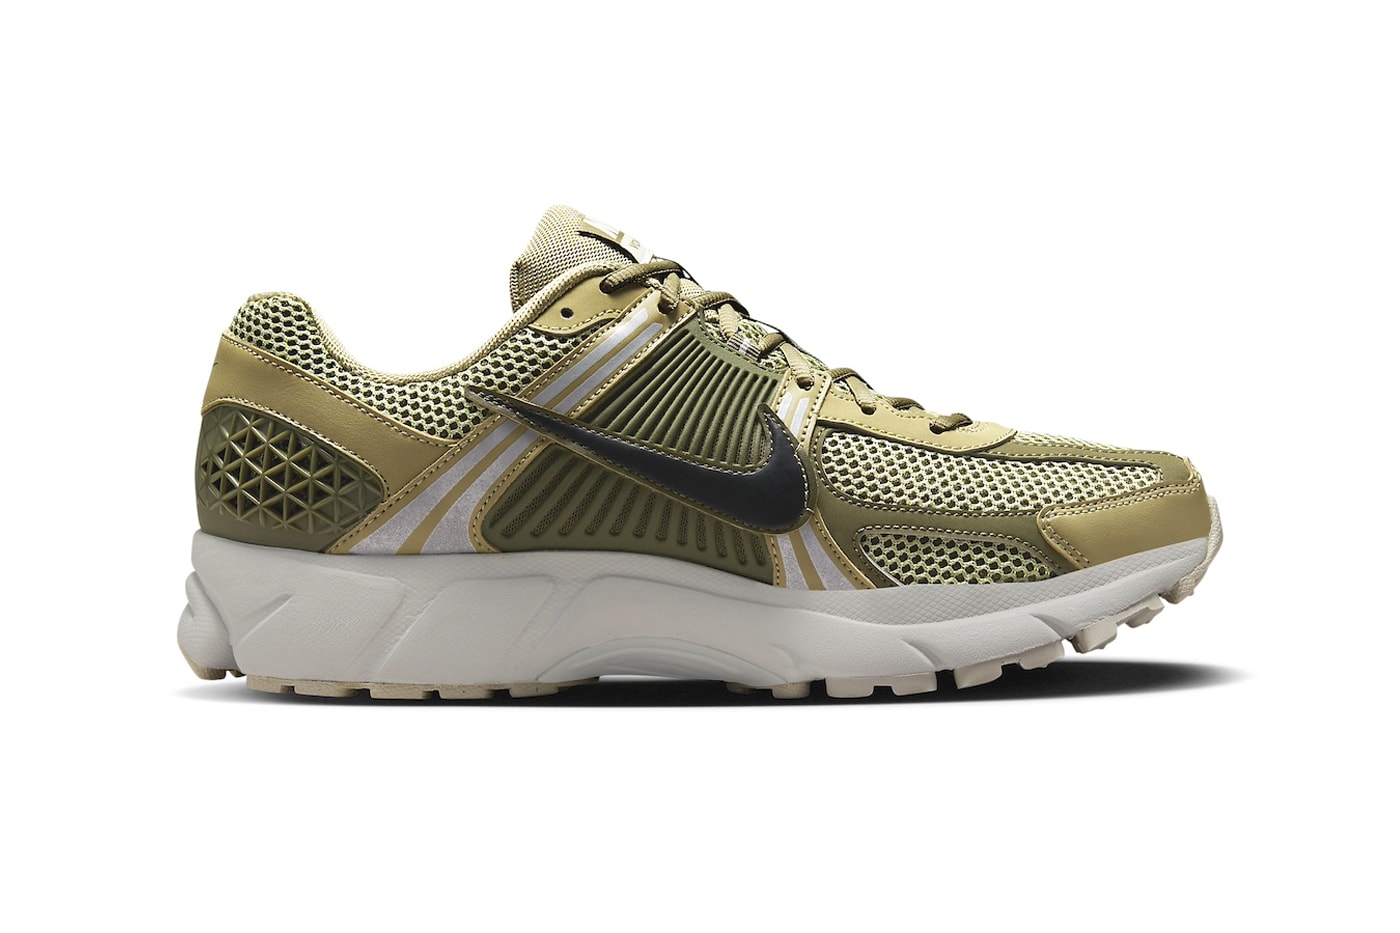 Nike Zoom Vomero 5 Resurfaces in "Neutral Olive" FJ1915-200 comfortable dad sneakers swoosh everyday shoes green 